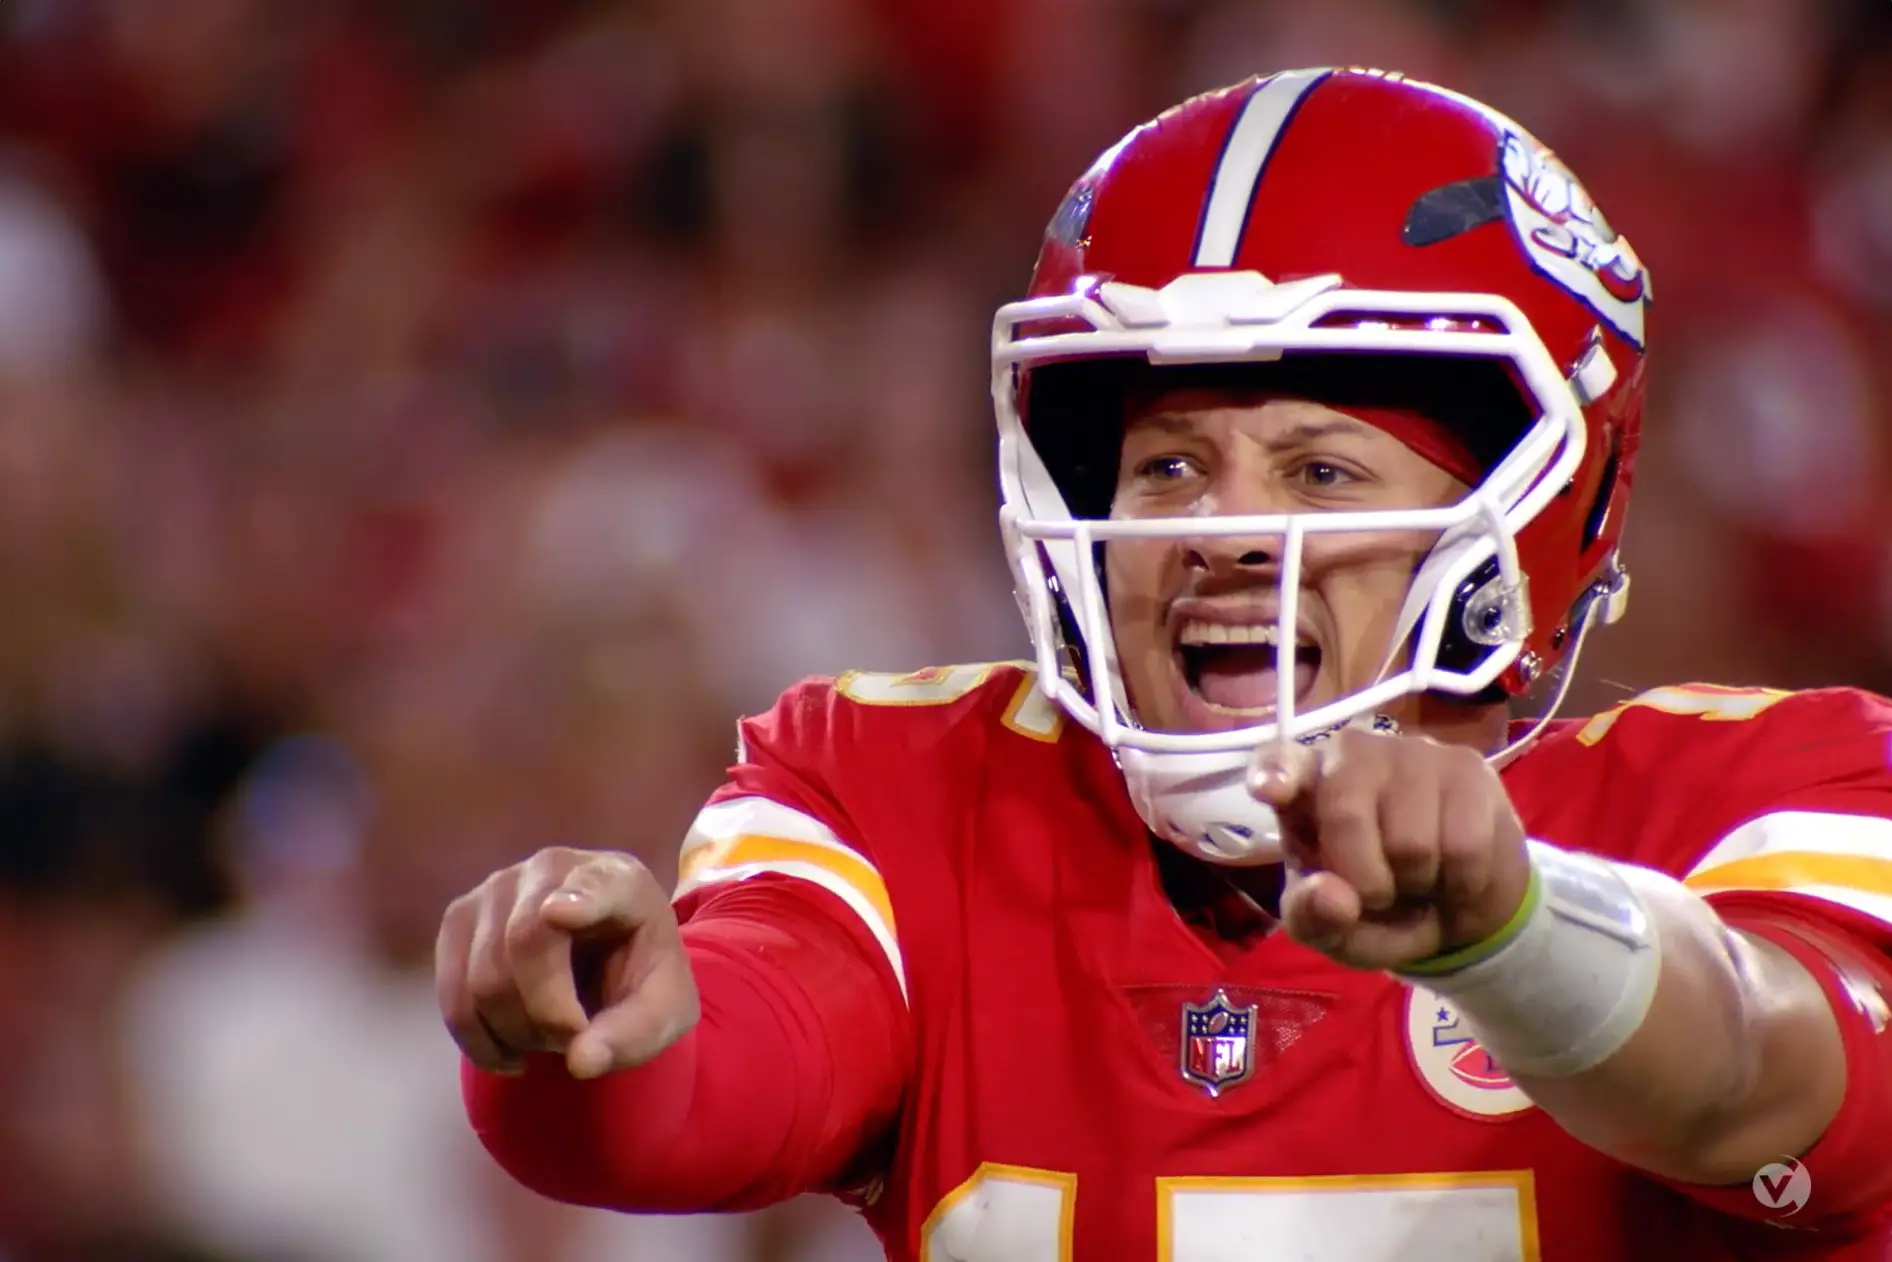 A Kansas Chiefs football player is pointing his finger during an entertainment event.